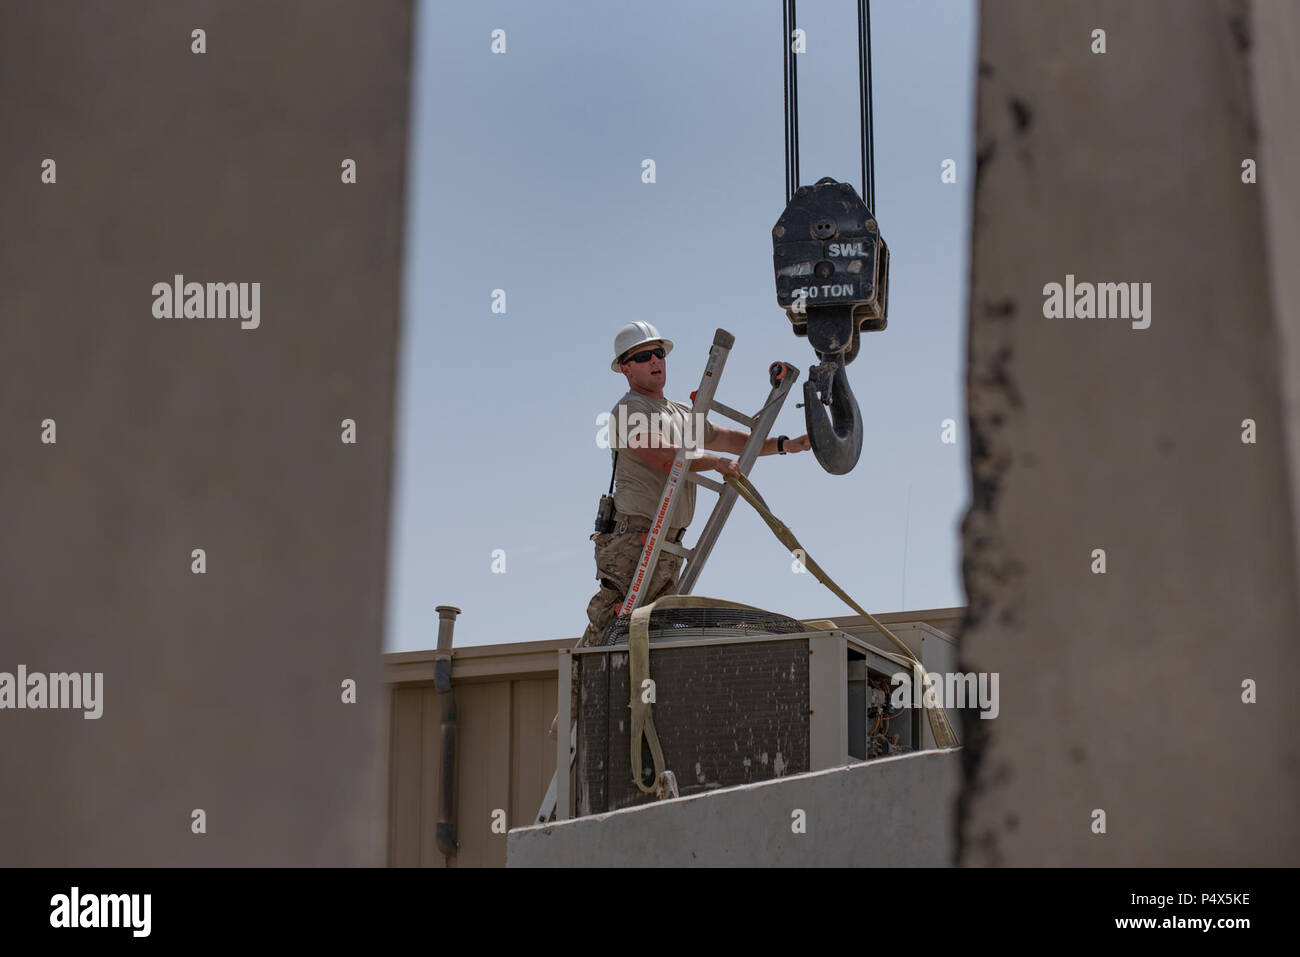 Staff Sgt. Matthew Sayward, a pavement equipment operator with the 407th Expeditionary Civil Engineer Squadron, guides a crane hook into place above a heating, ventilation and air conditioning unit May 4, 2017, in Southwest Asia. Sayward regularly assists HVAC technicians during the move of multi-ton, AC package units on roofs and outdoor mounts. As average daily temperatures in the Air Force Central Command region of operations exceed 100 degrees Fahrenheit, cooling units are essential to support continuous missions of coalition forces against ISIS. Stock Photo